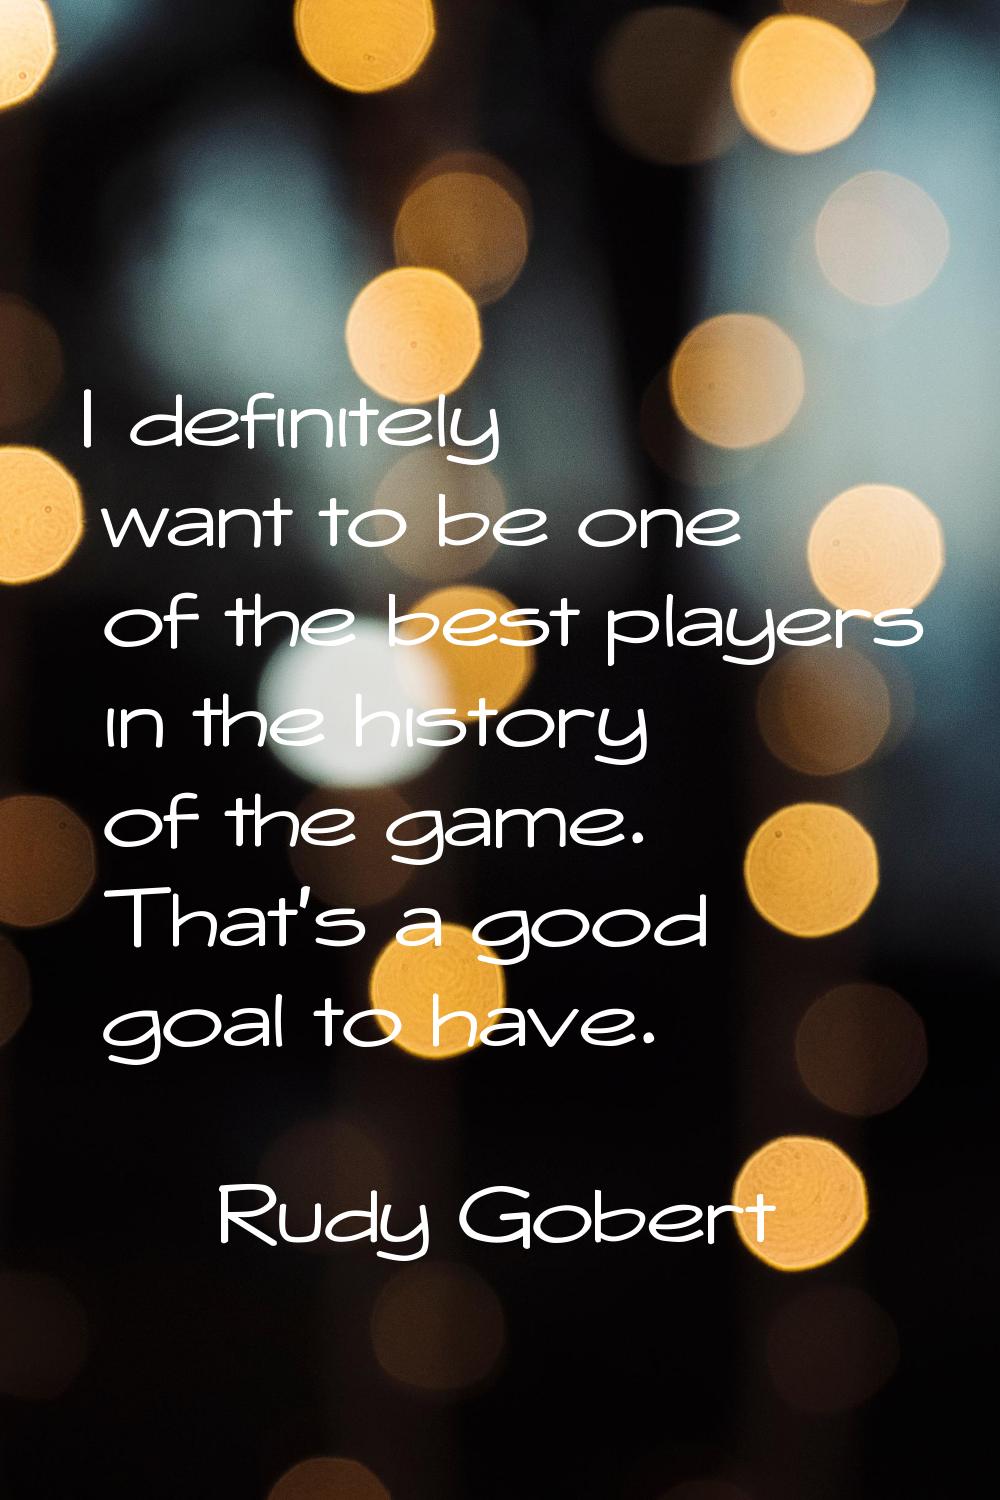 I definitely want to be one of the best players in the history of the game. That's a good goal to h